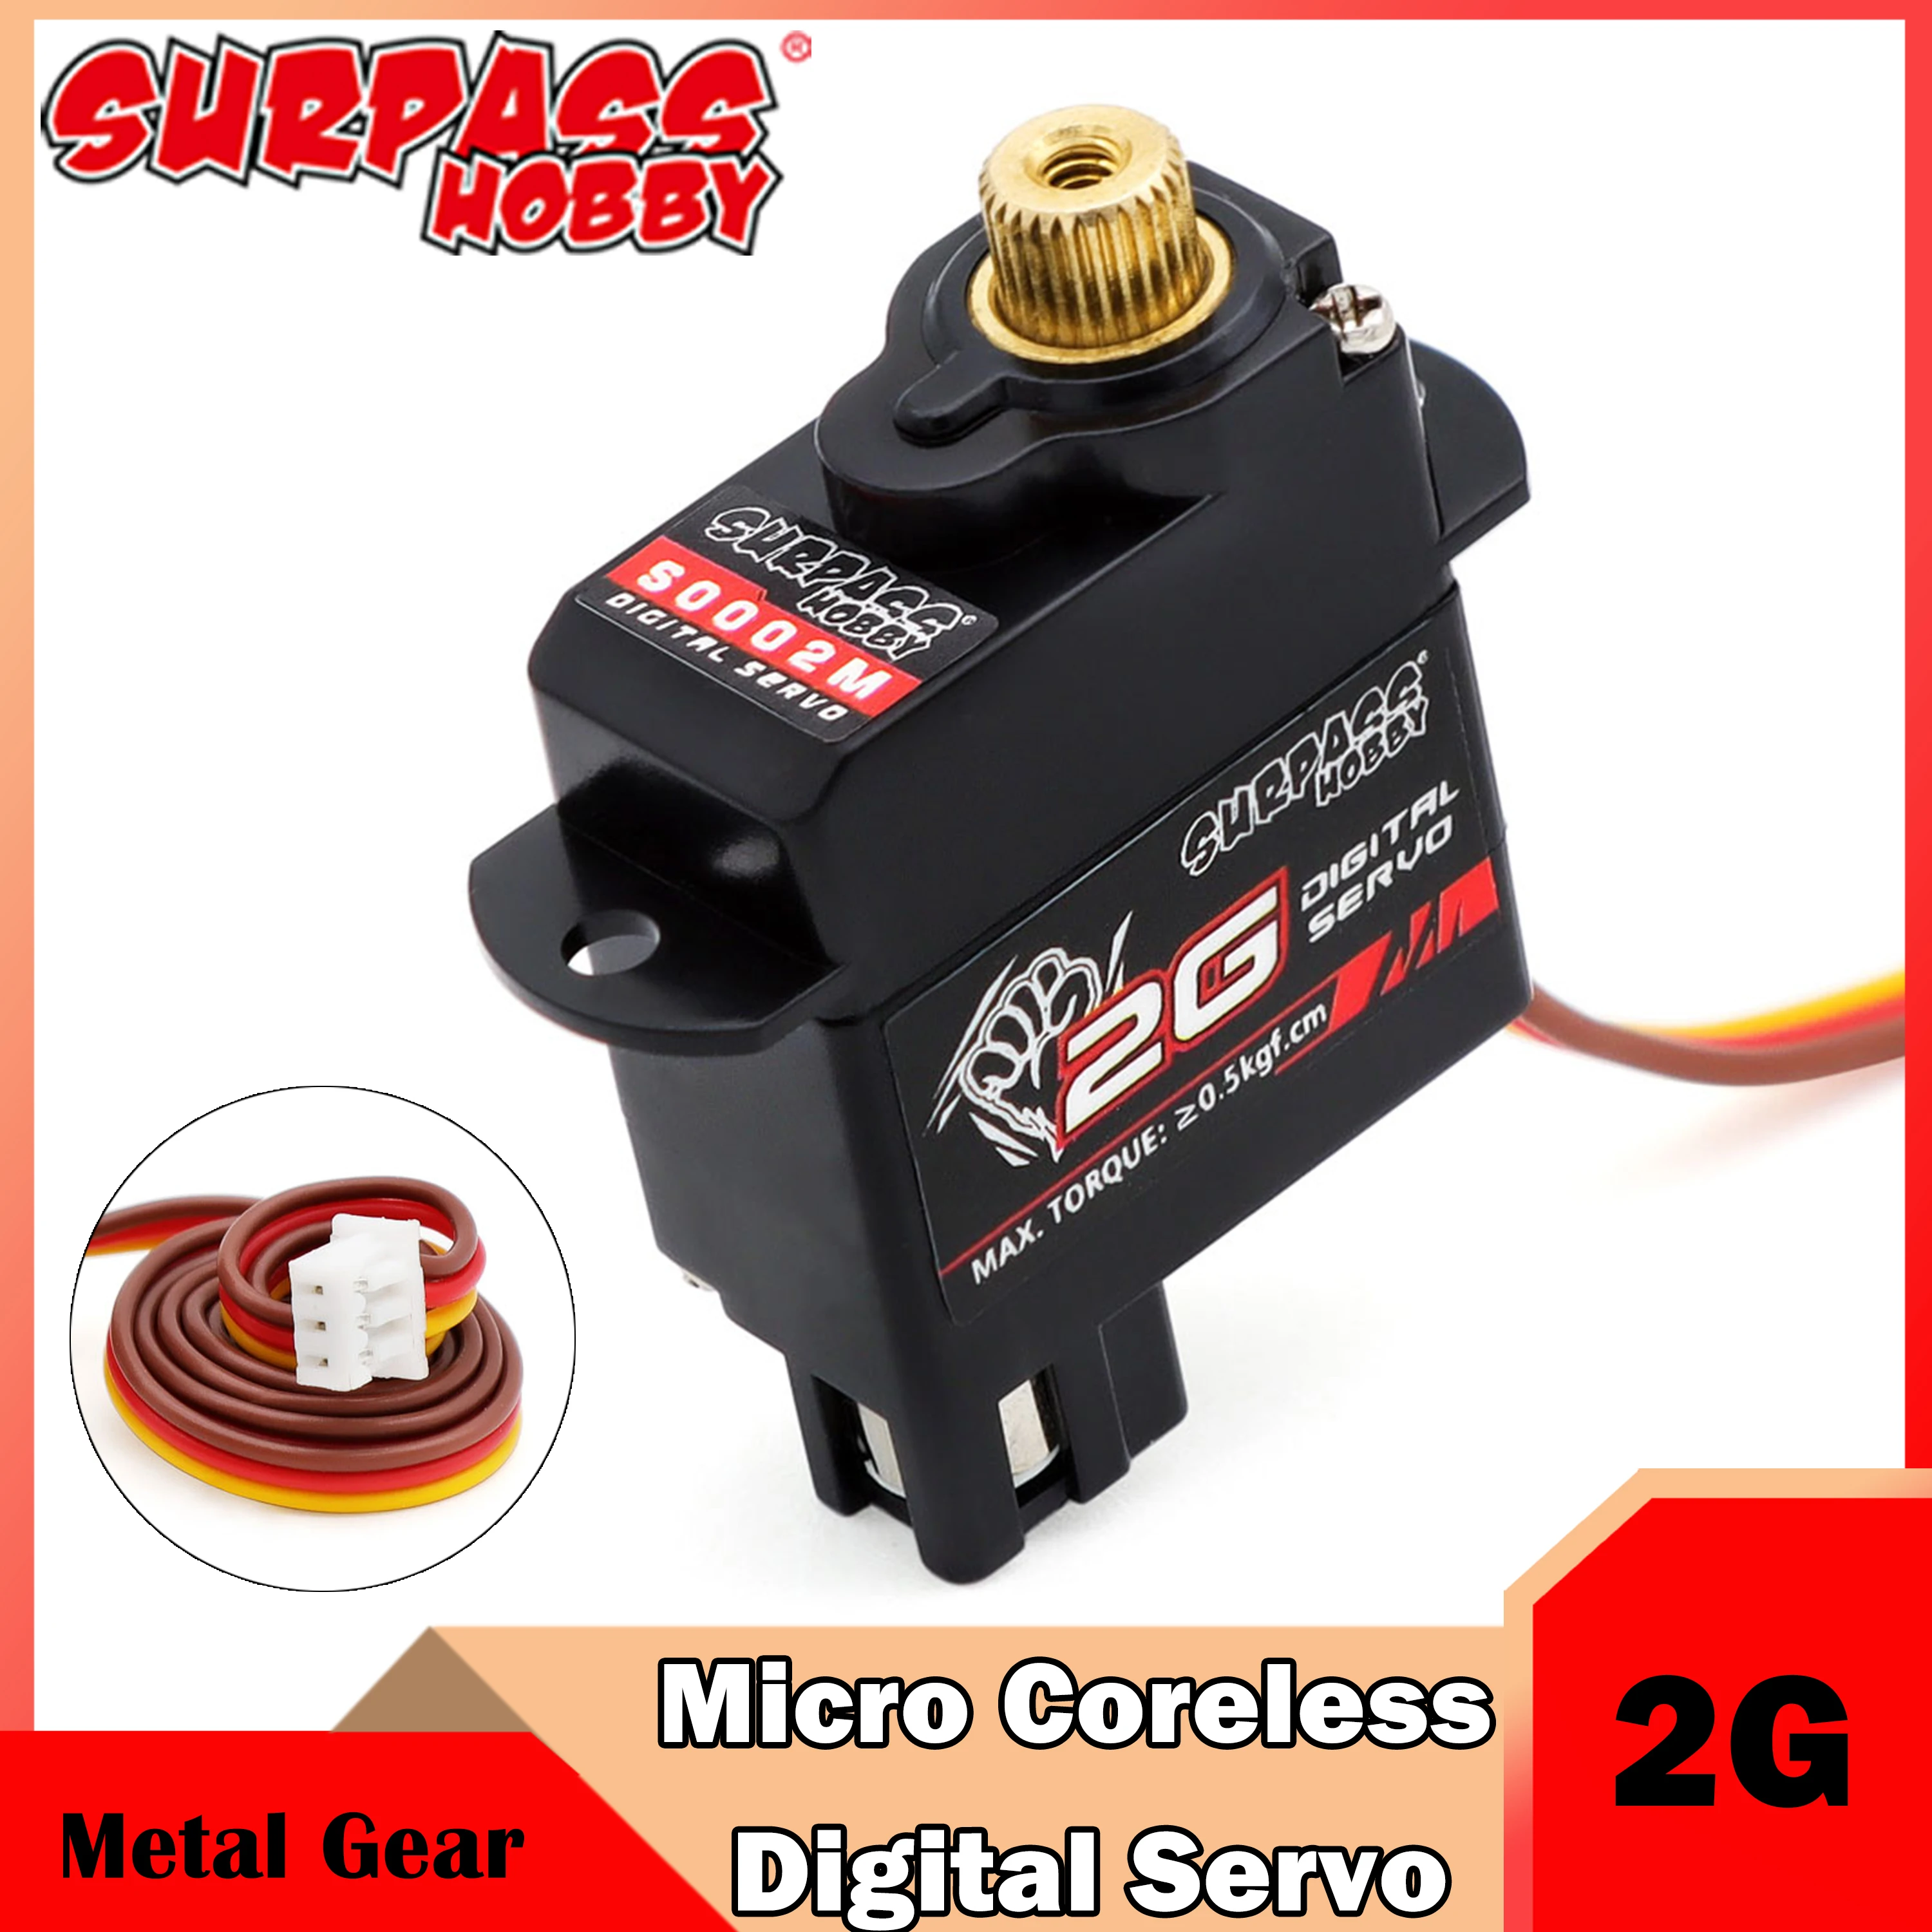 

Surpass Hobby 2g Micro Digital Servo Metal Gear Mini Coreless Motor for Rc Car Airplane Boat Fixed-wing Helicopter Robot Model